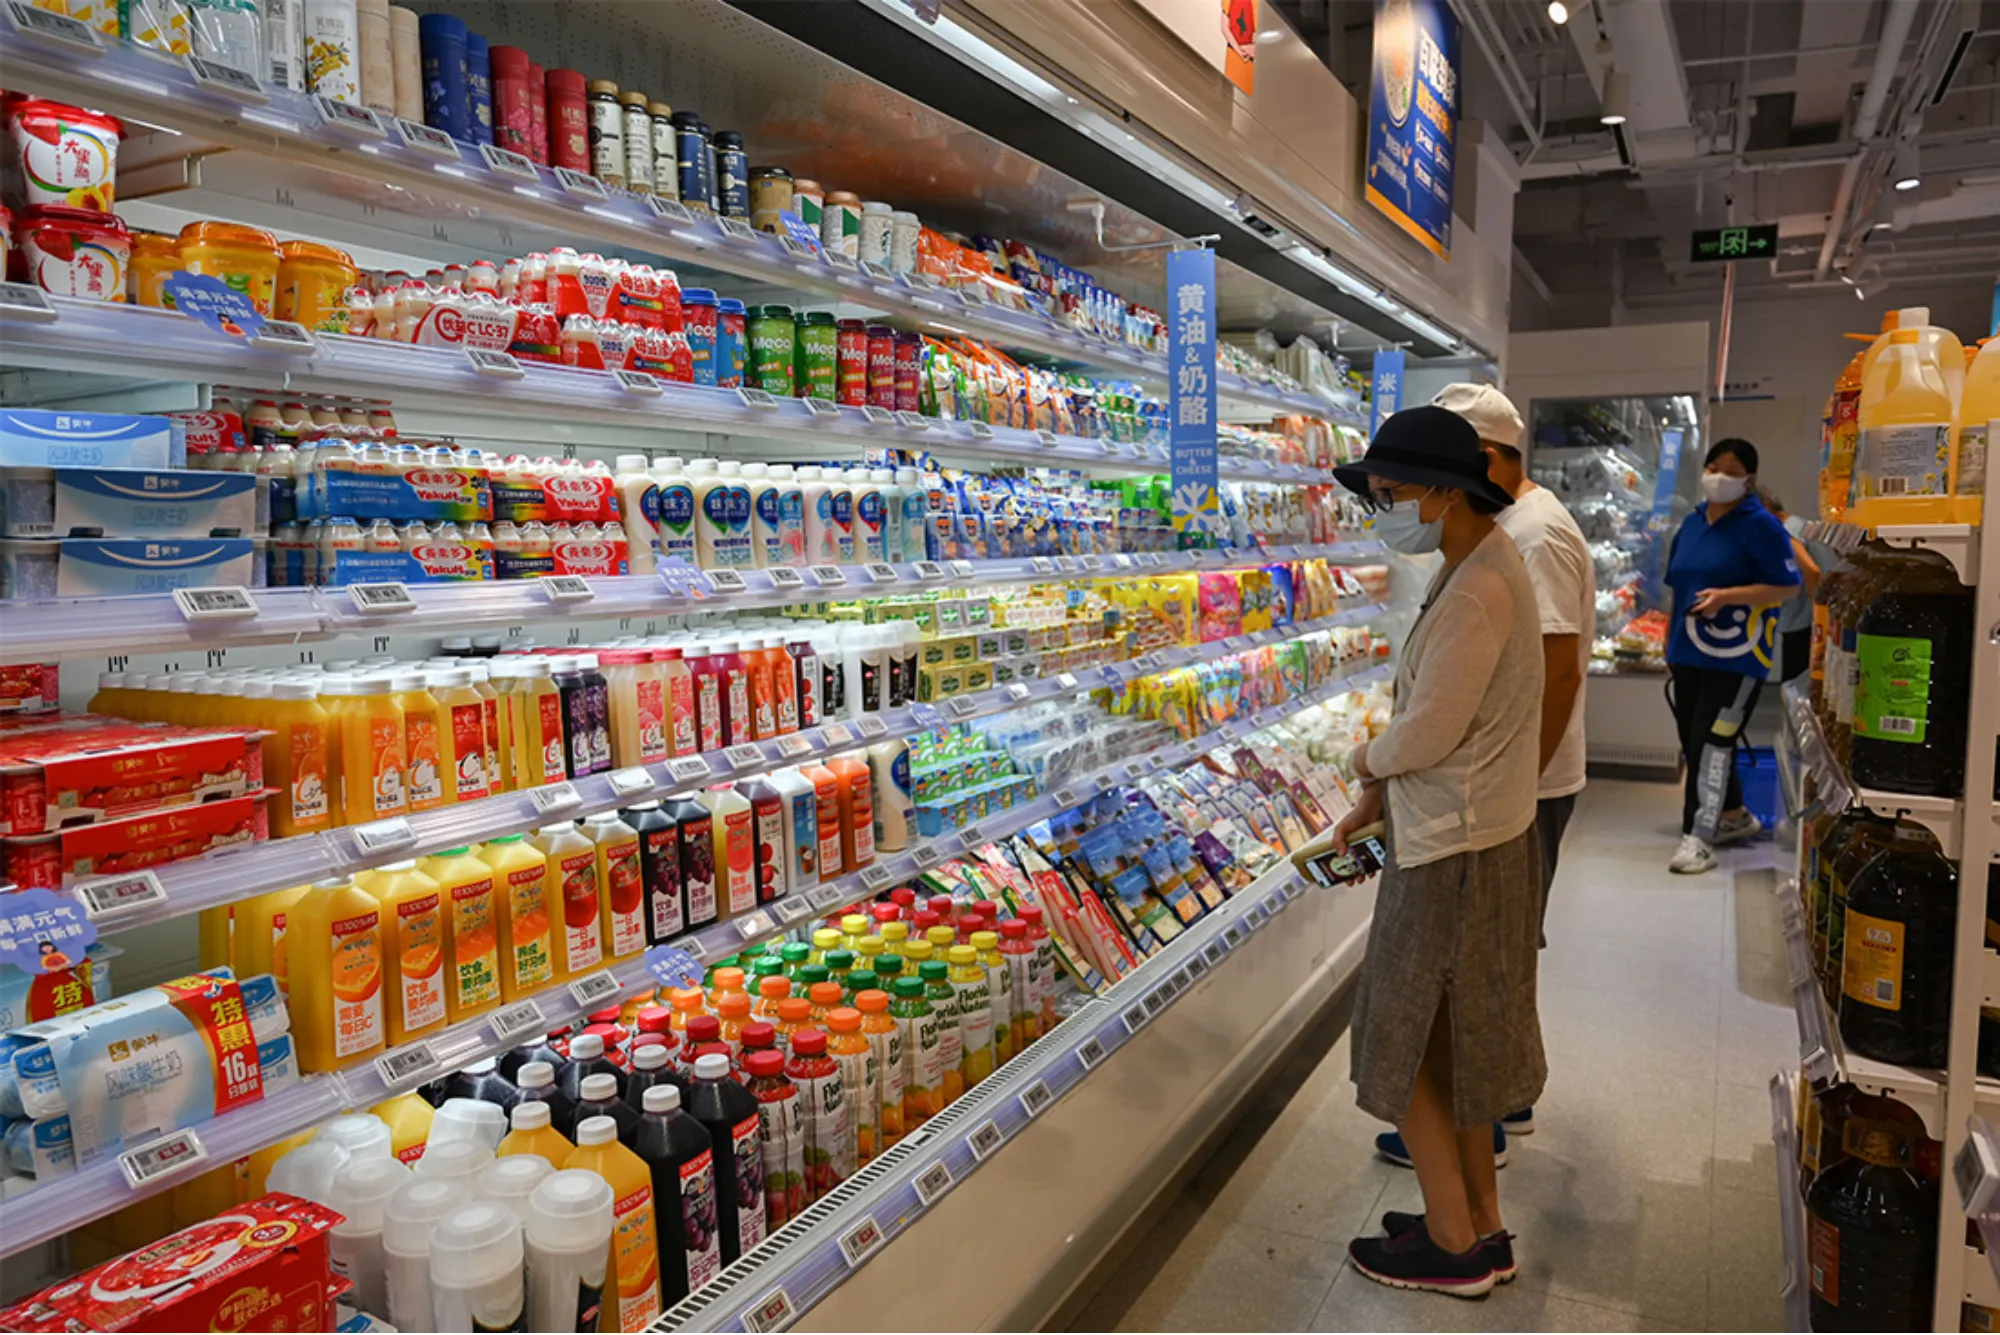 Enhancing Customer Engagement and Efficiency with Hanshow's Electronic Shelf Label Technology